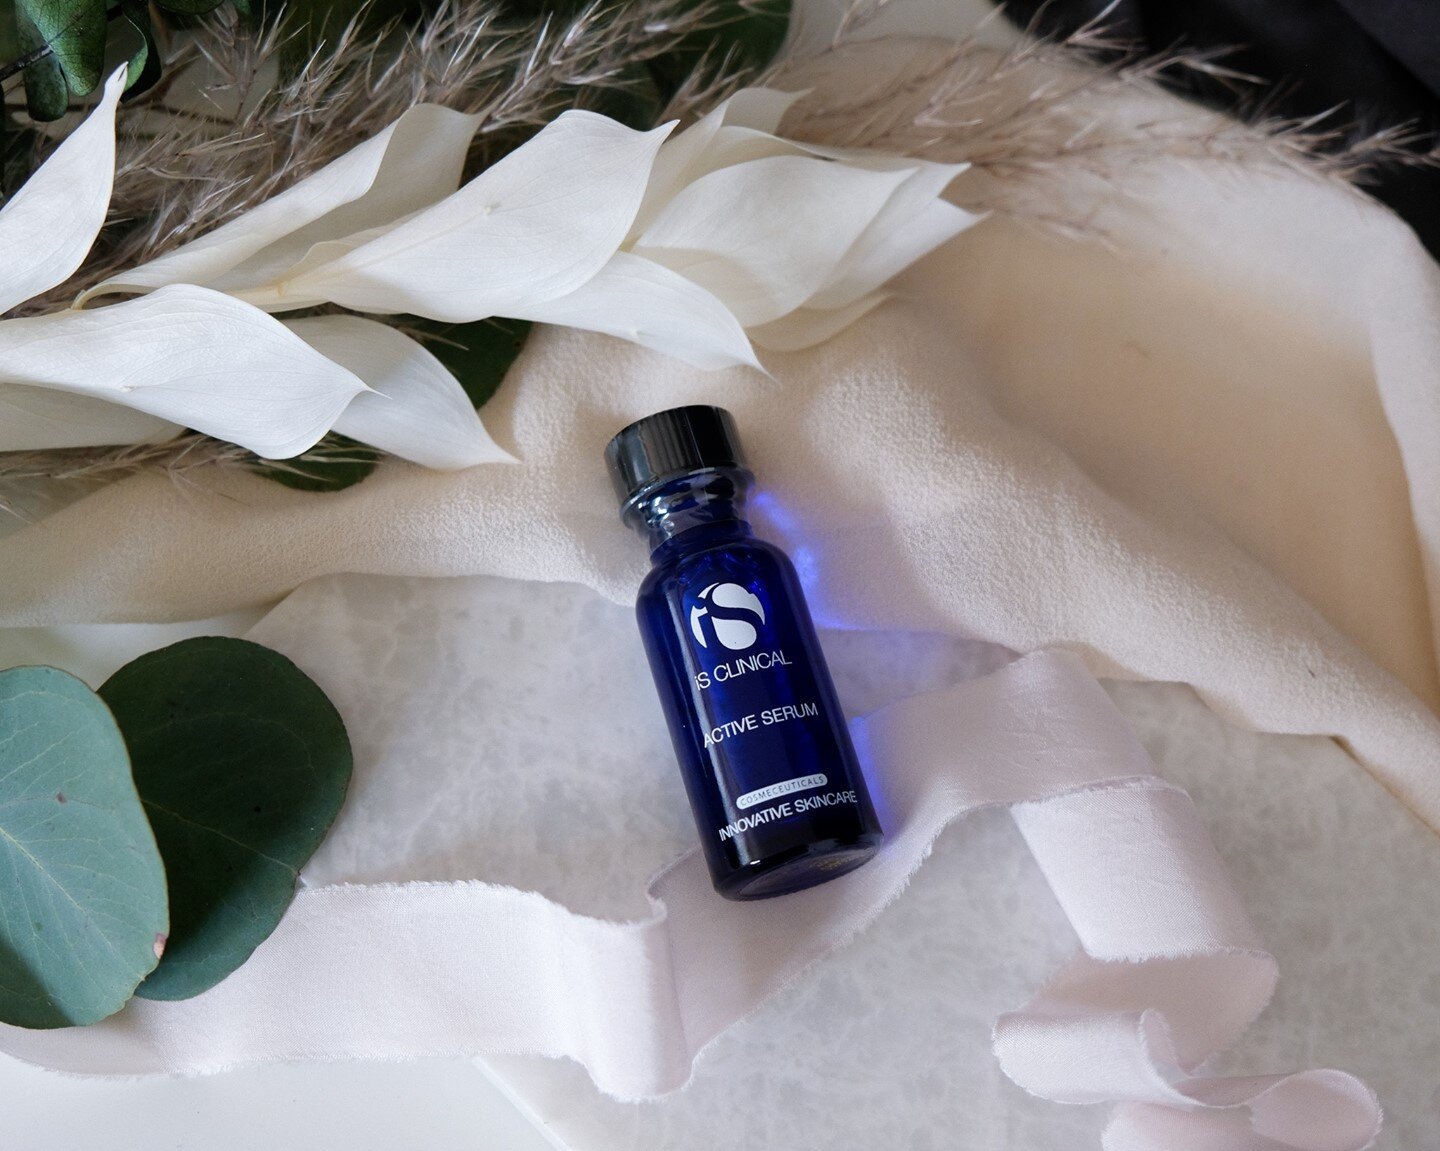 LETS TALK SERUMS! ⁠
⁠
Pictured is @isClinical's Active Serum which is excellent for all skin types and for all ages, this powerful botanical serum leaves the skin moist and smooth. ⁠
⁠⁠
Serums help improve major skin concerns but not one serum is ali